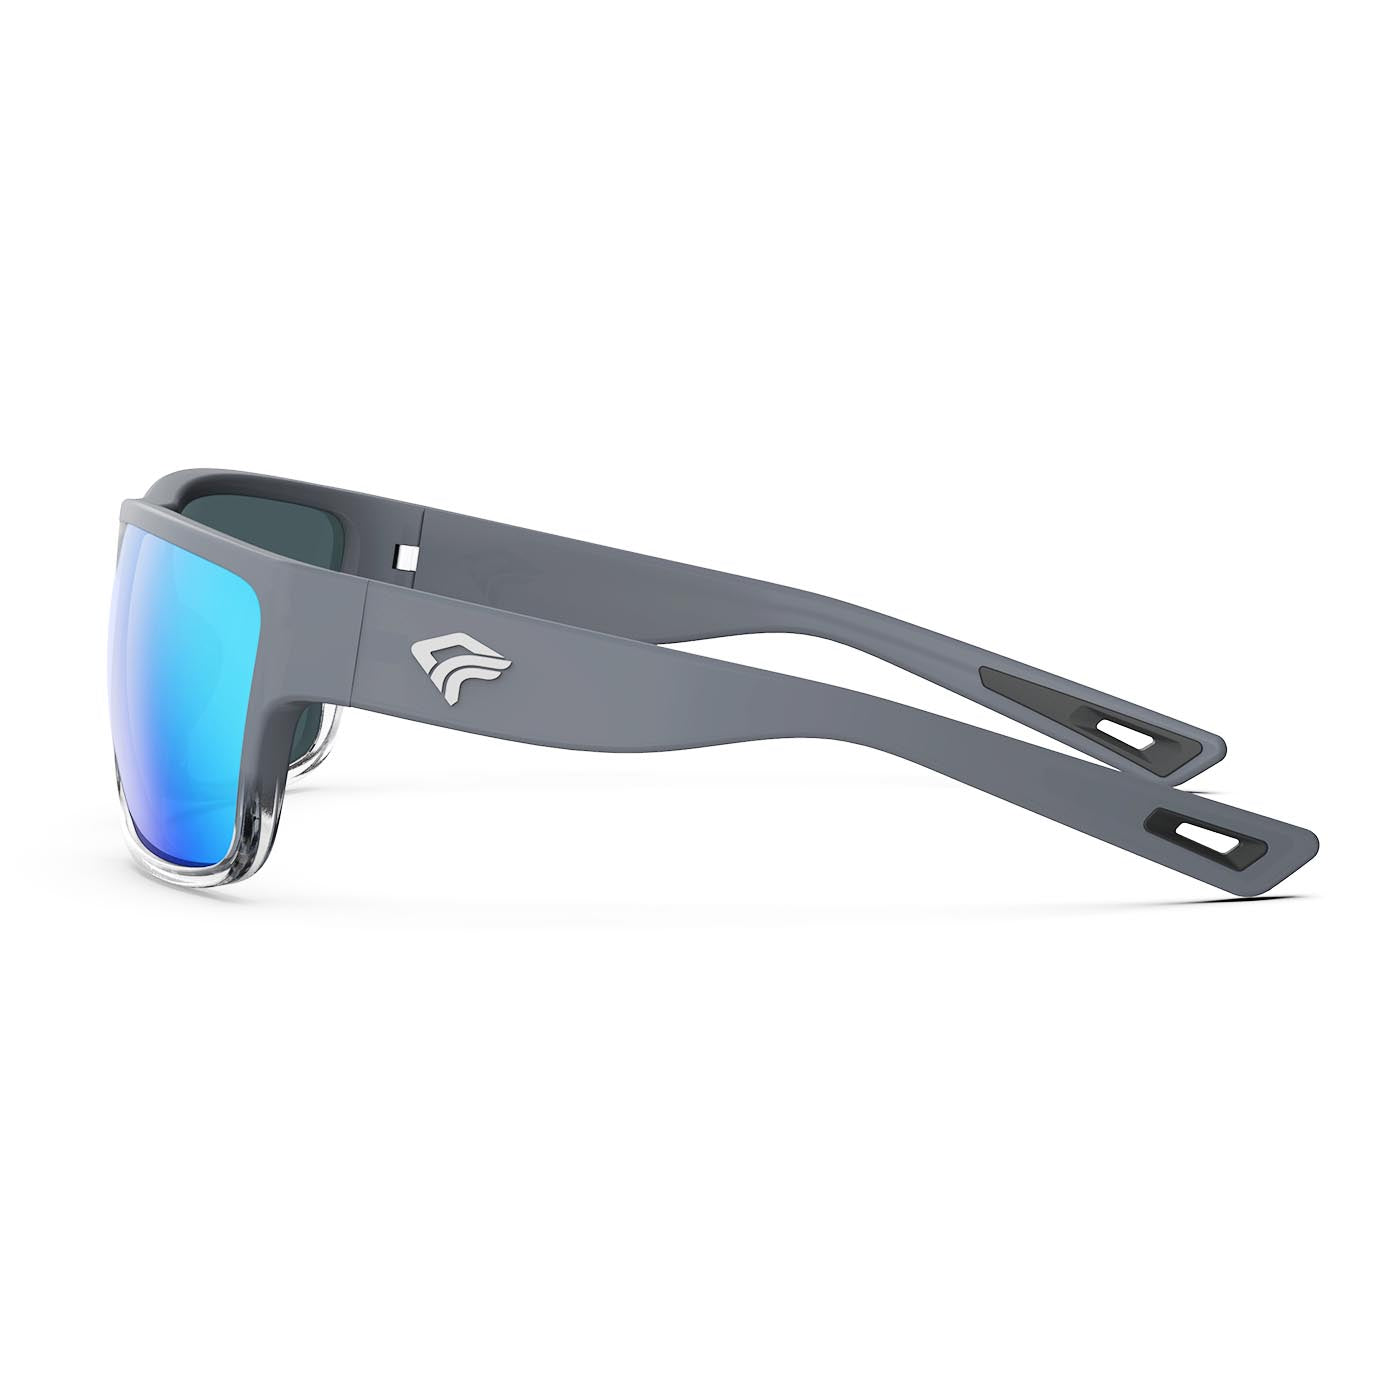 Pure Polarized Sports Sunglasses with Golf, and and Grey - Transparent - To Fishing Matte for Frame - Cycling, - Men Warranty and Running, Women Adjustable Half Flexible Ideal Lifetime Ideal for